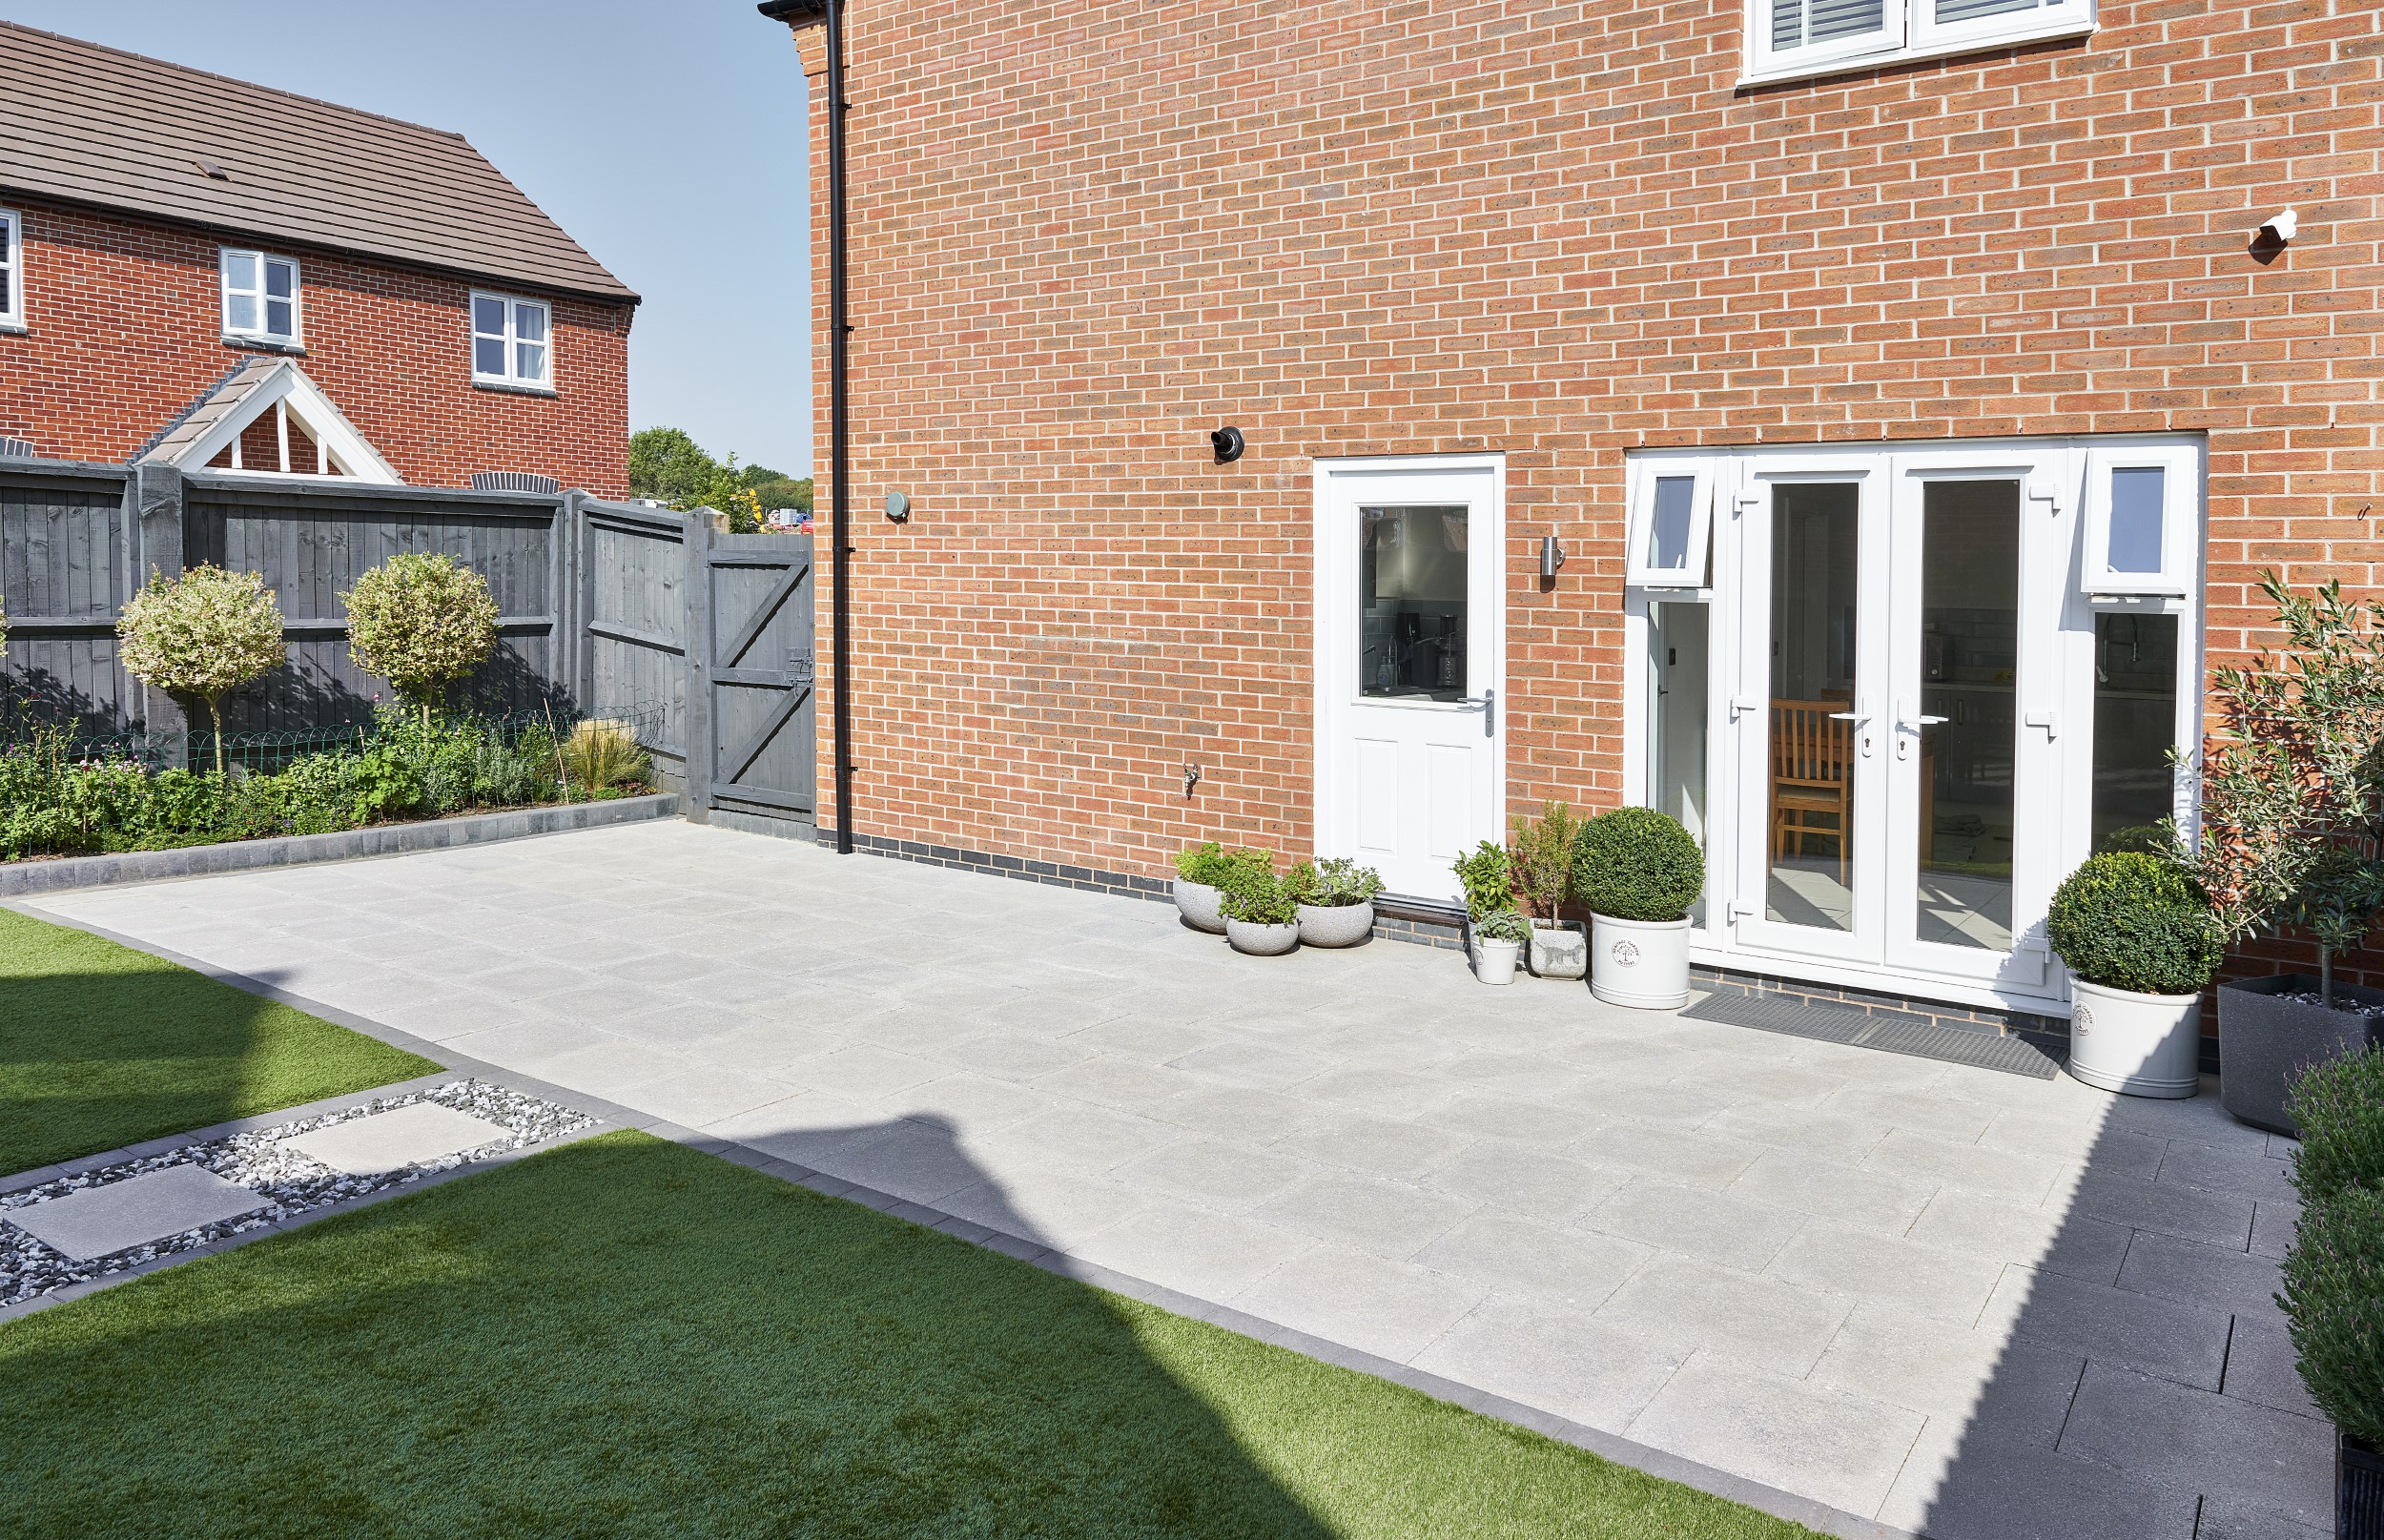 Chaucer Charcoal | 600 x 6000 paving slabs | cheap paving slabs | garden patio slabs | garden pavers | garden paving | garden paving slabs | garden slab | Grey Patio Slabs | grey paving slabs | patio pavers | patio slabs | patio slabs near me | paver stones | pavers for the garden | Slabs for patio